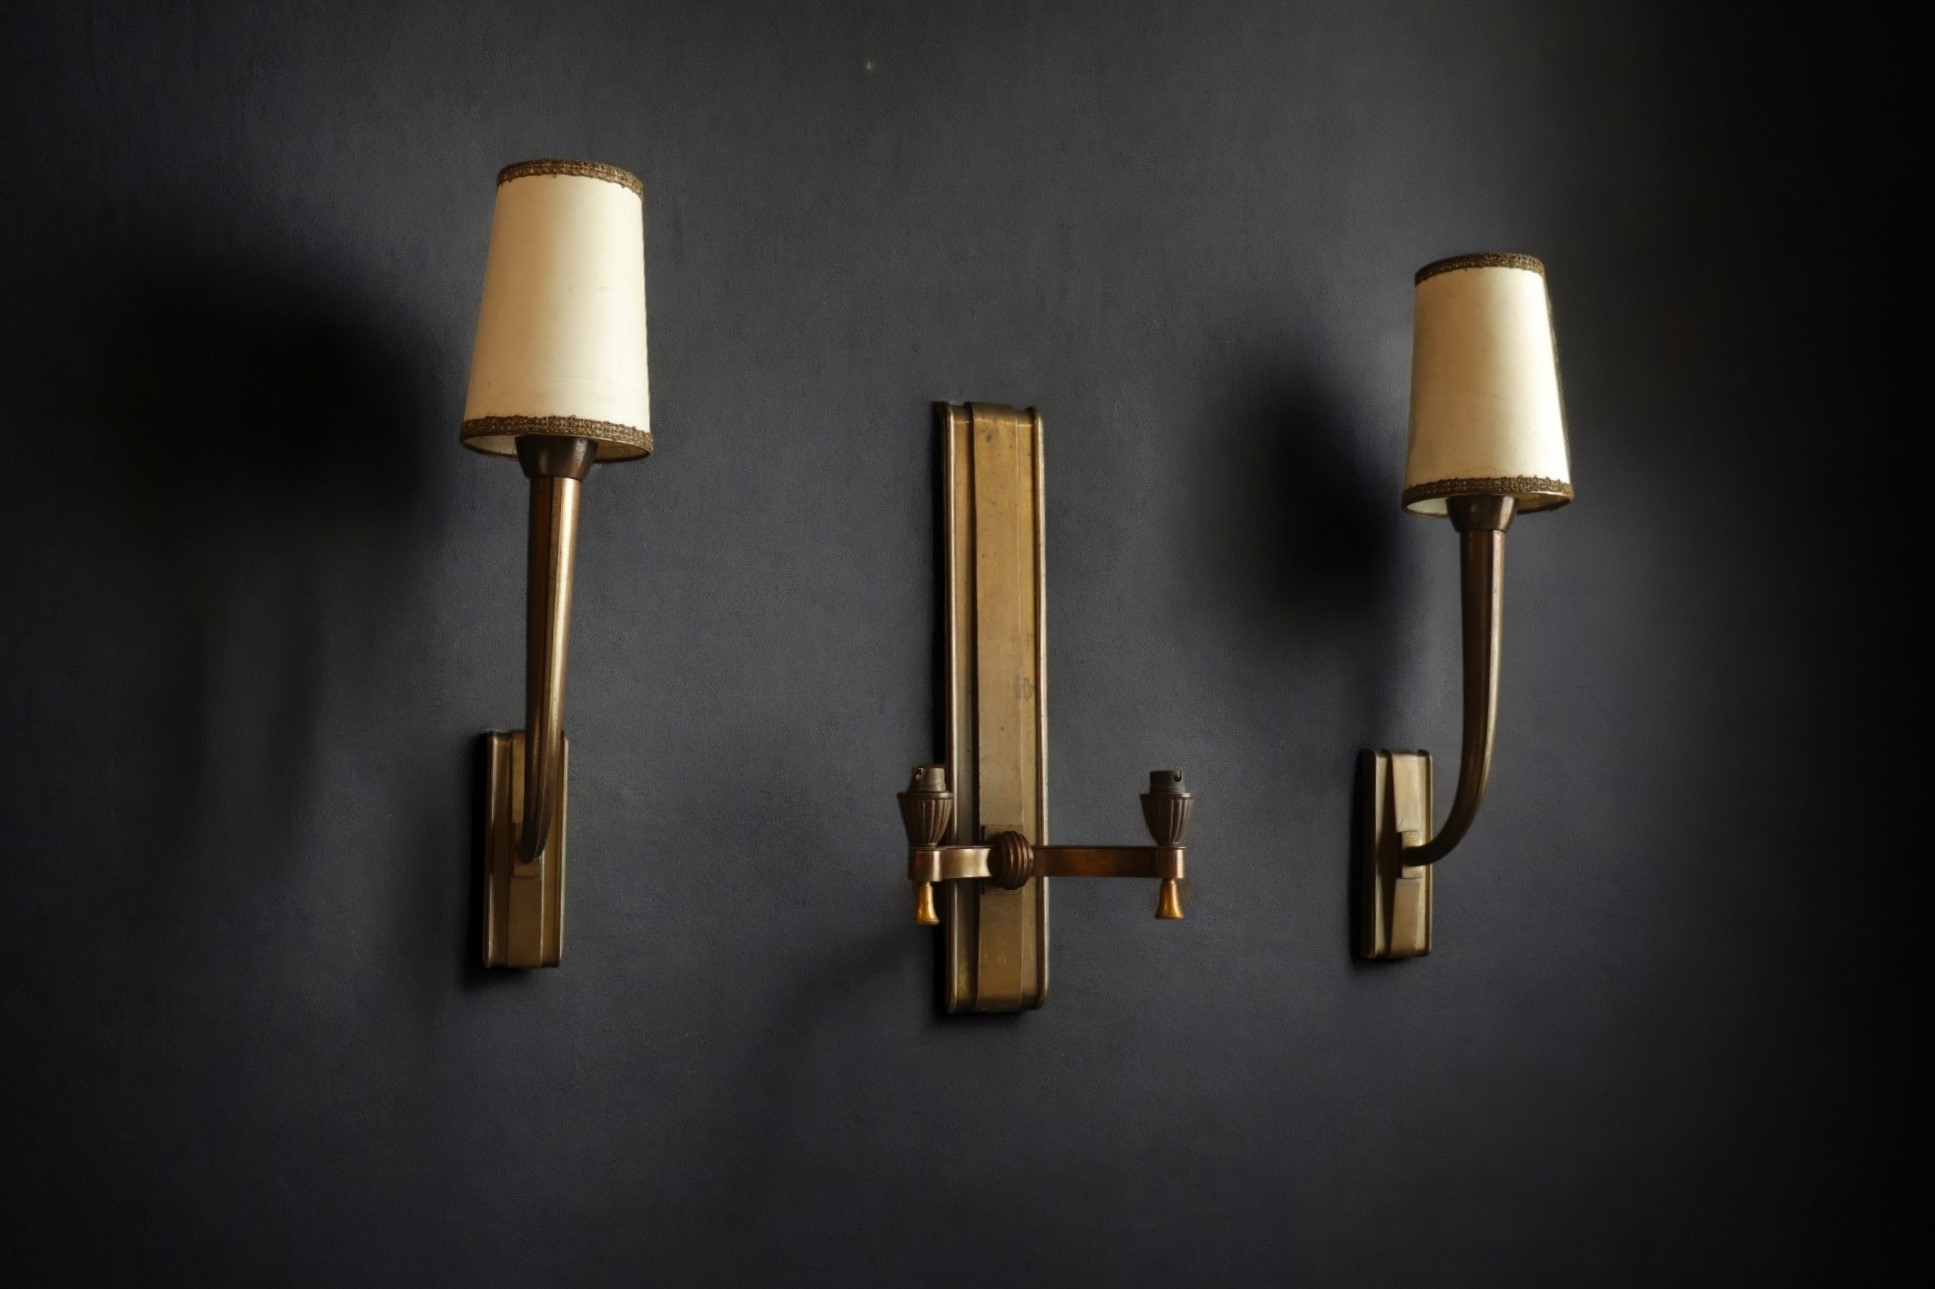 Jean PASCAUD (1903-1996) Set consisting of a double sconce and a pair of single sconces in patinated